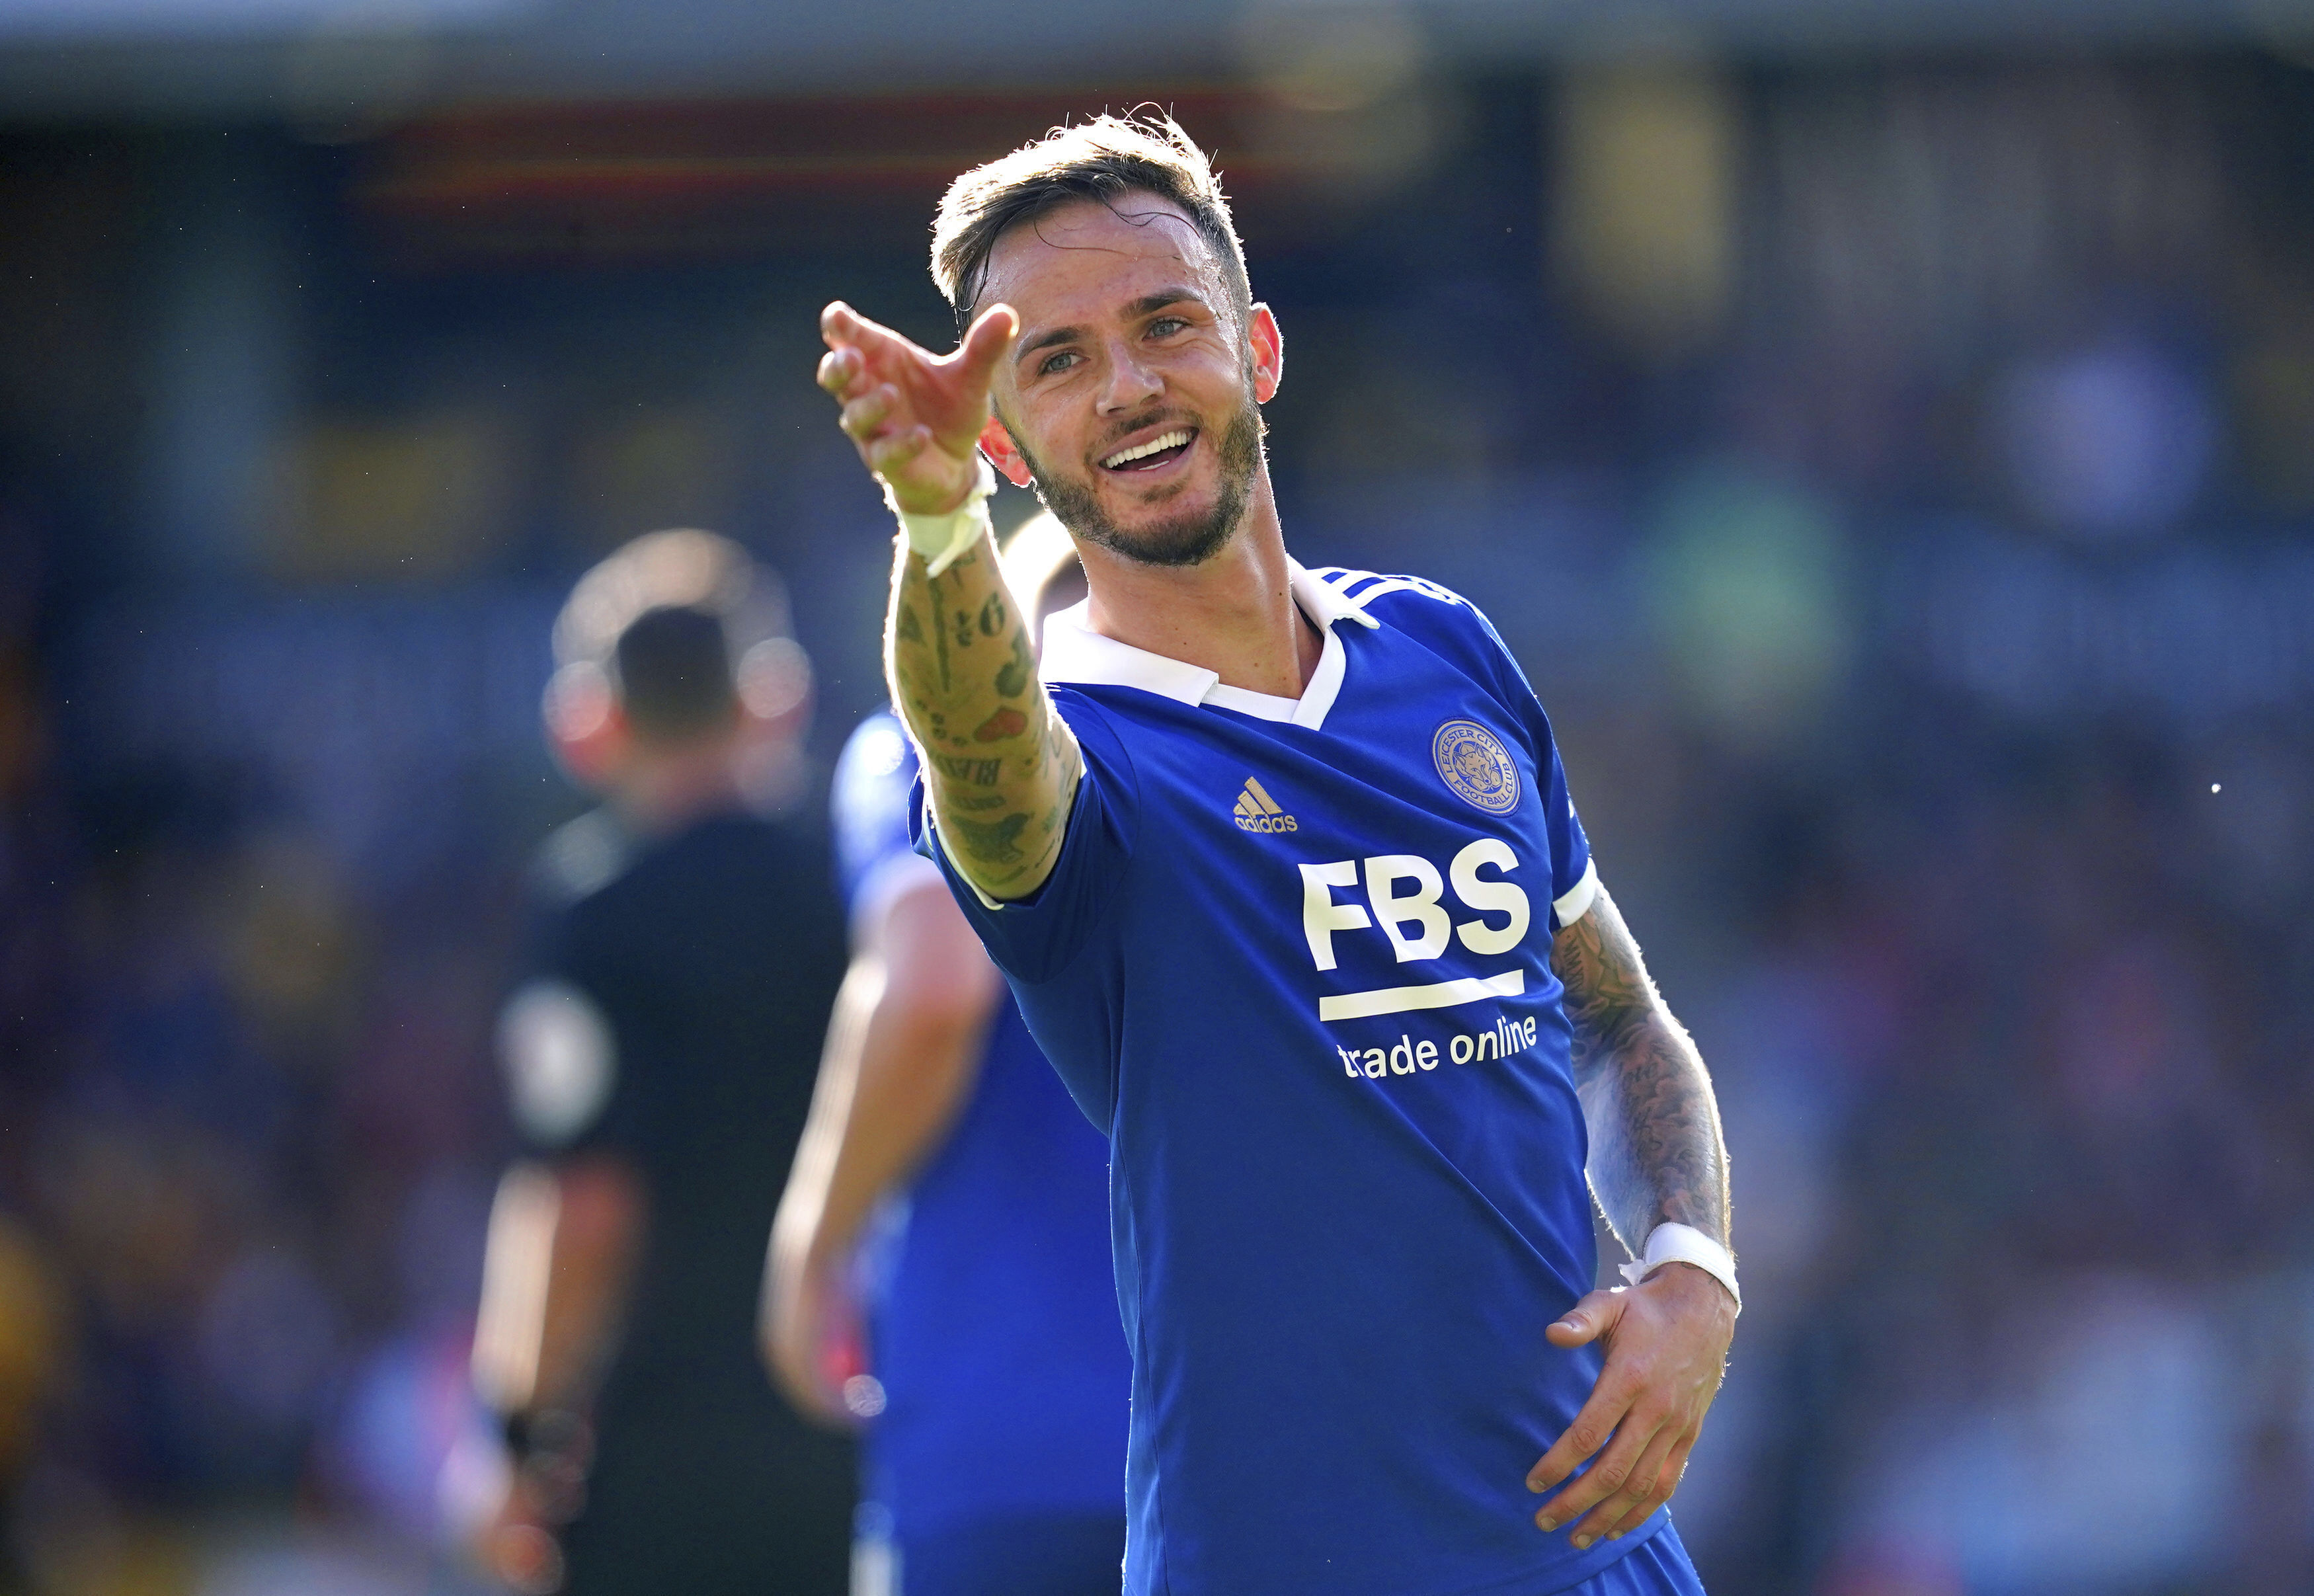  James Maddison of Leicester City celebrates scoring a goal during the match against Tottenham Hotspur.